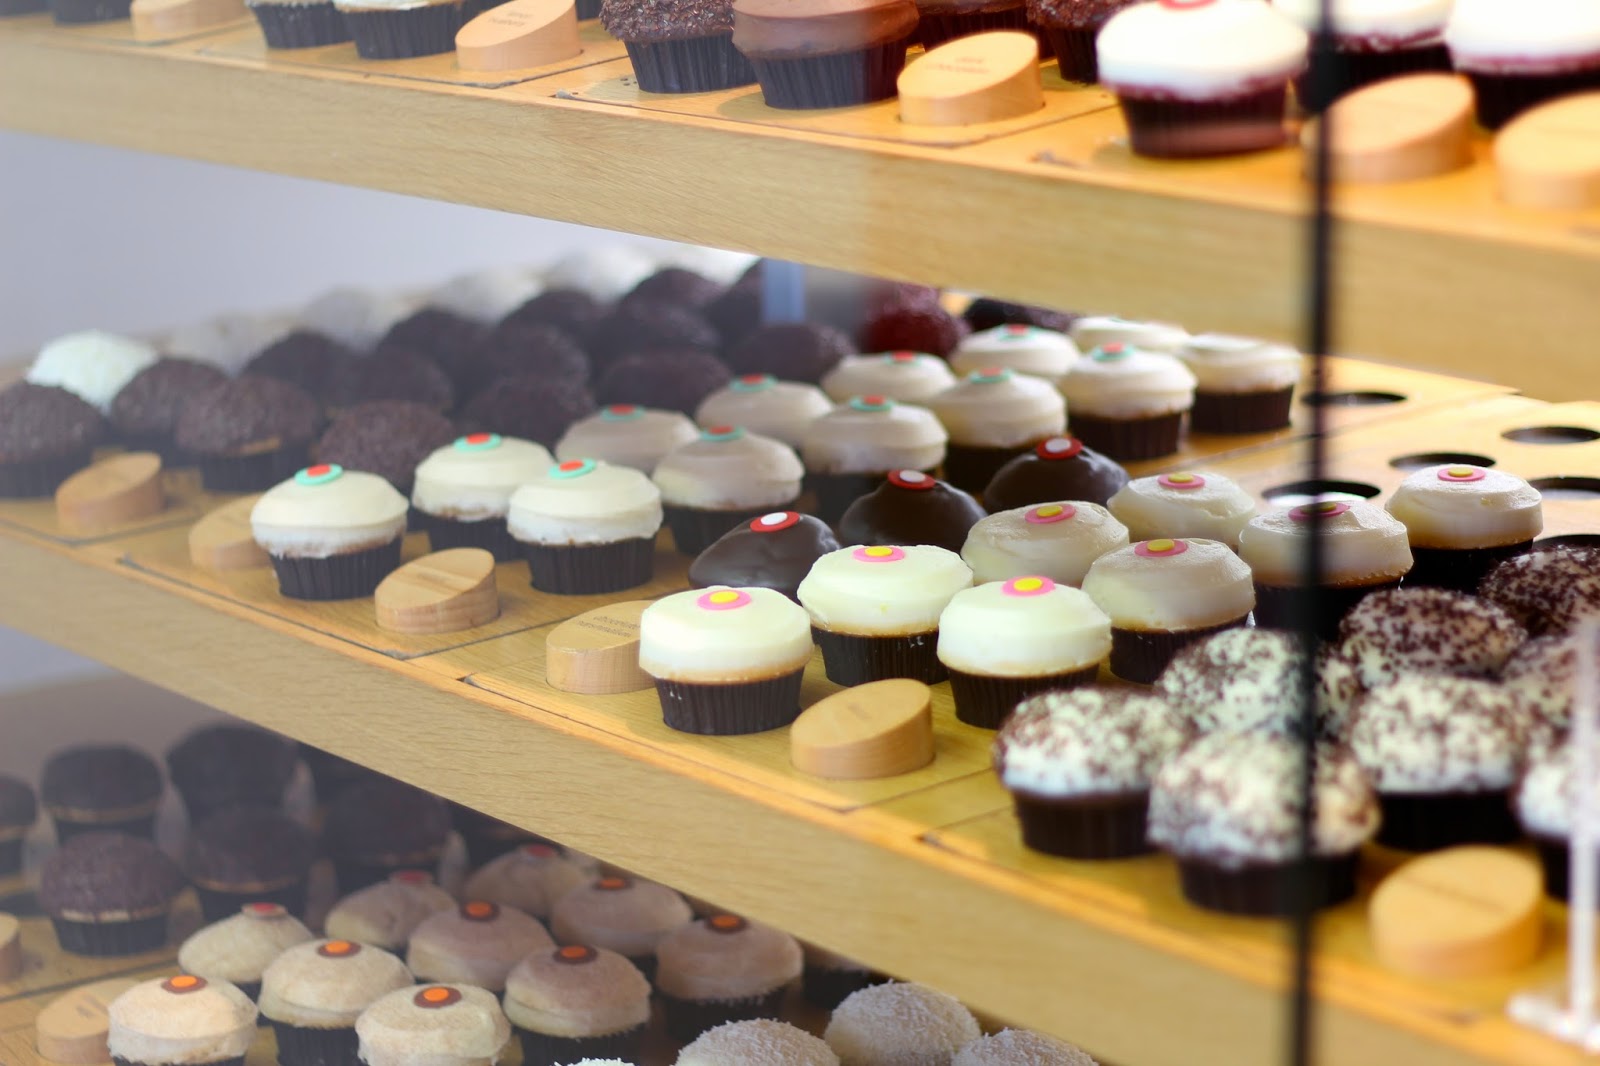 sprinkles cupcakes, french connection, french connection sale, sprinkles